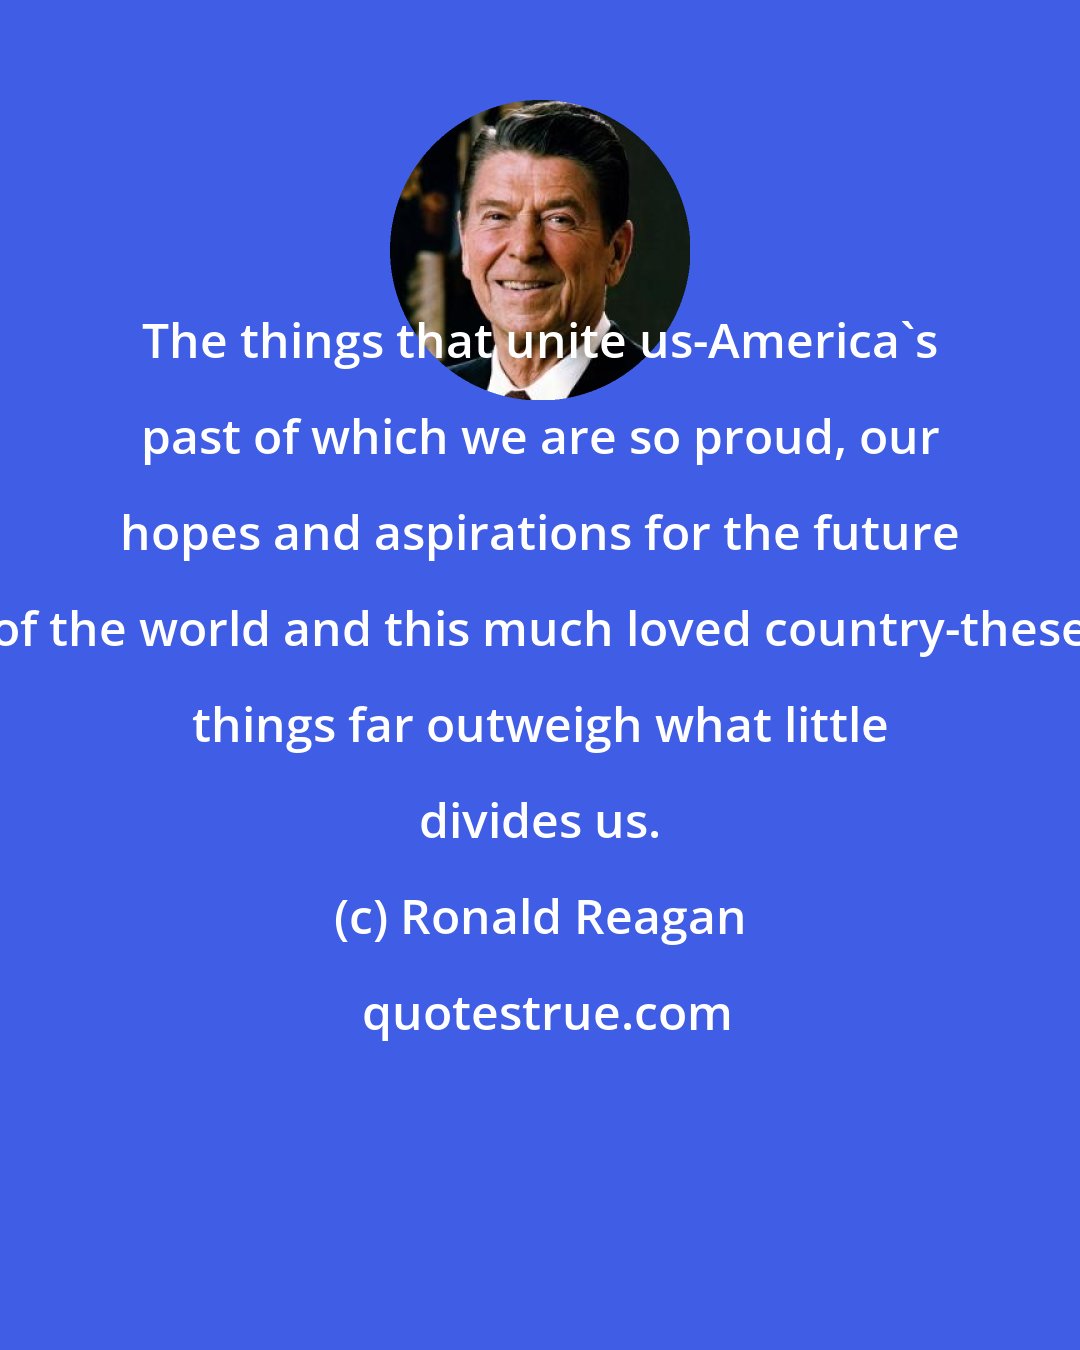 Ronald Reagan: The things that unite us-America's past of which we are so proud, our hopes and aspirations for the future of the world and this much loved country-these things far outweigh what little divides us.